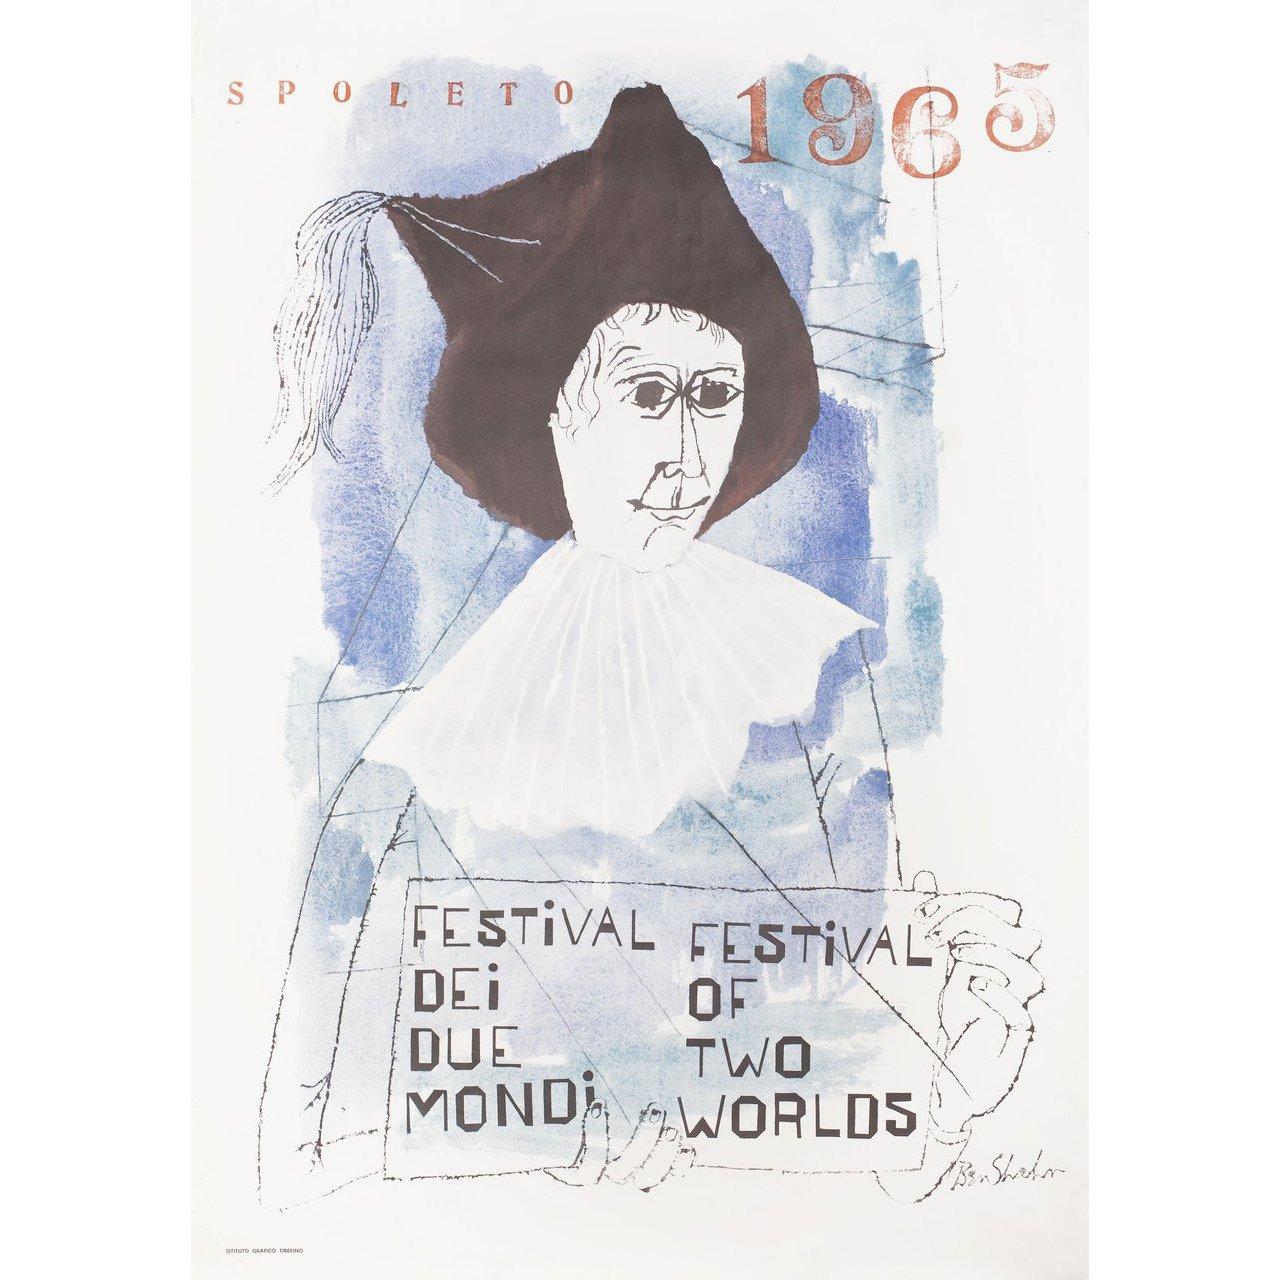 Original 1965 Italian foglio poster by Ben Shahn for the 1958 festival Spoleto Festival (Festival dei Due Mondi). Very Good condition, rolled with edge wear & staining. Please note: the size is stated in inches and the actual size can vary by an